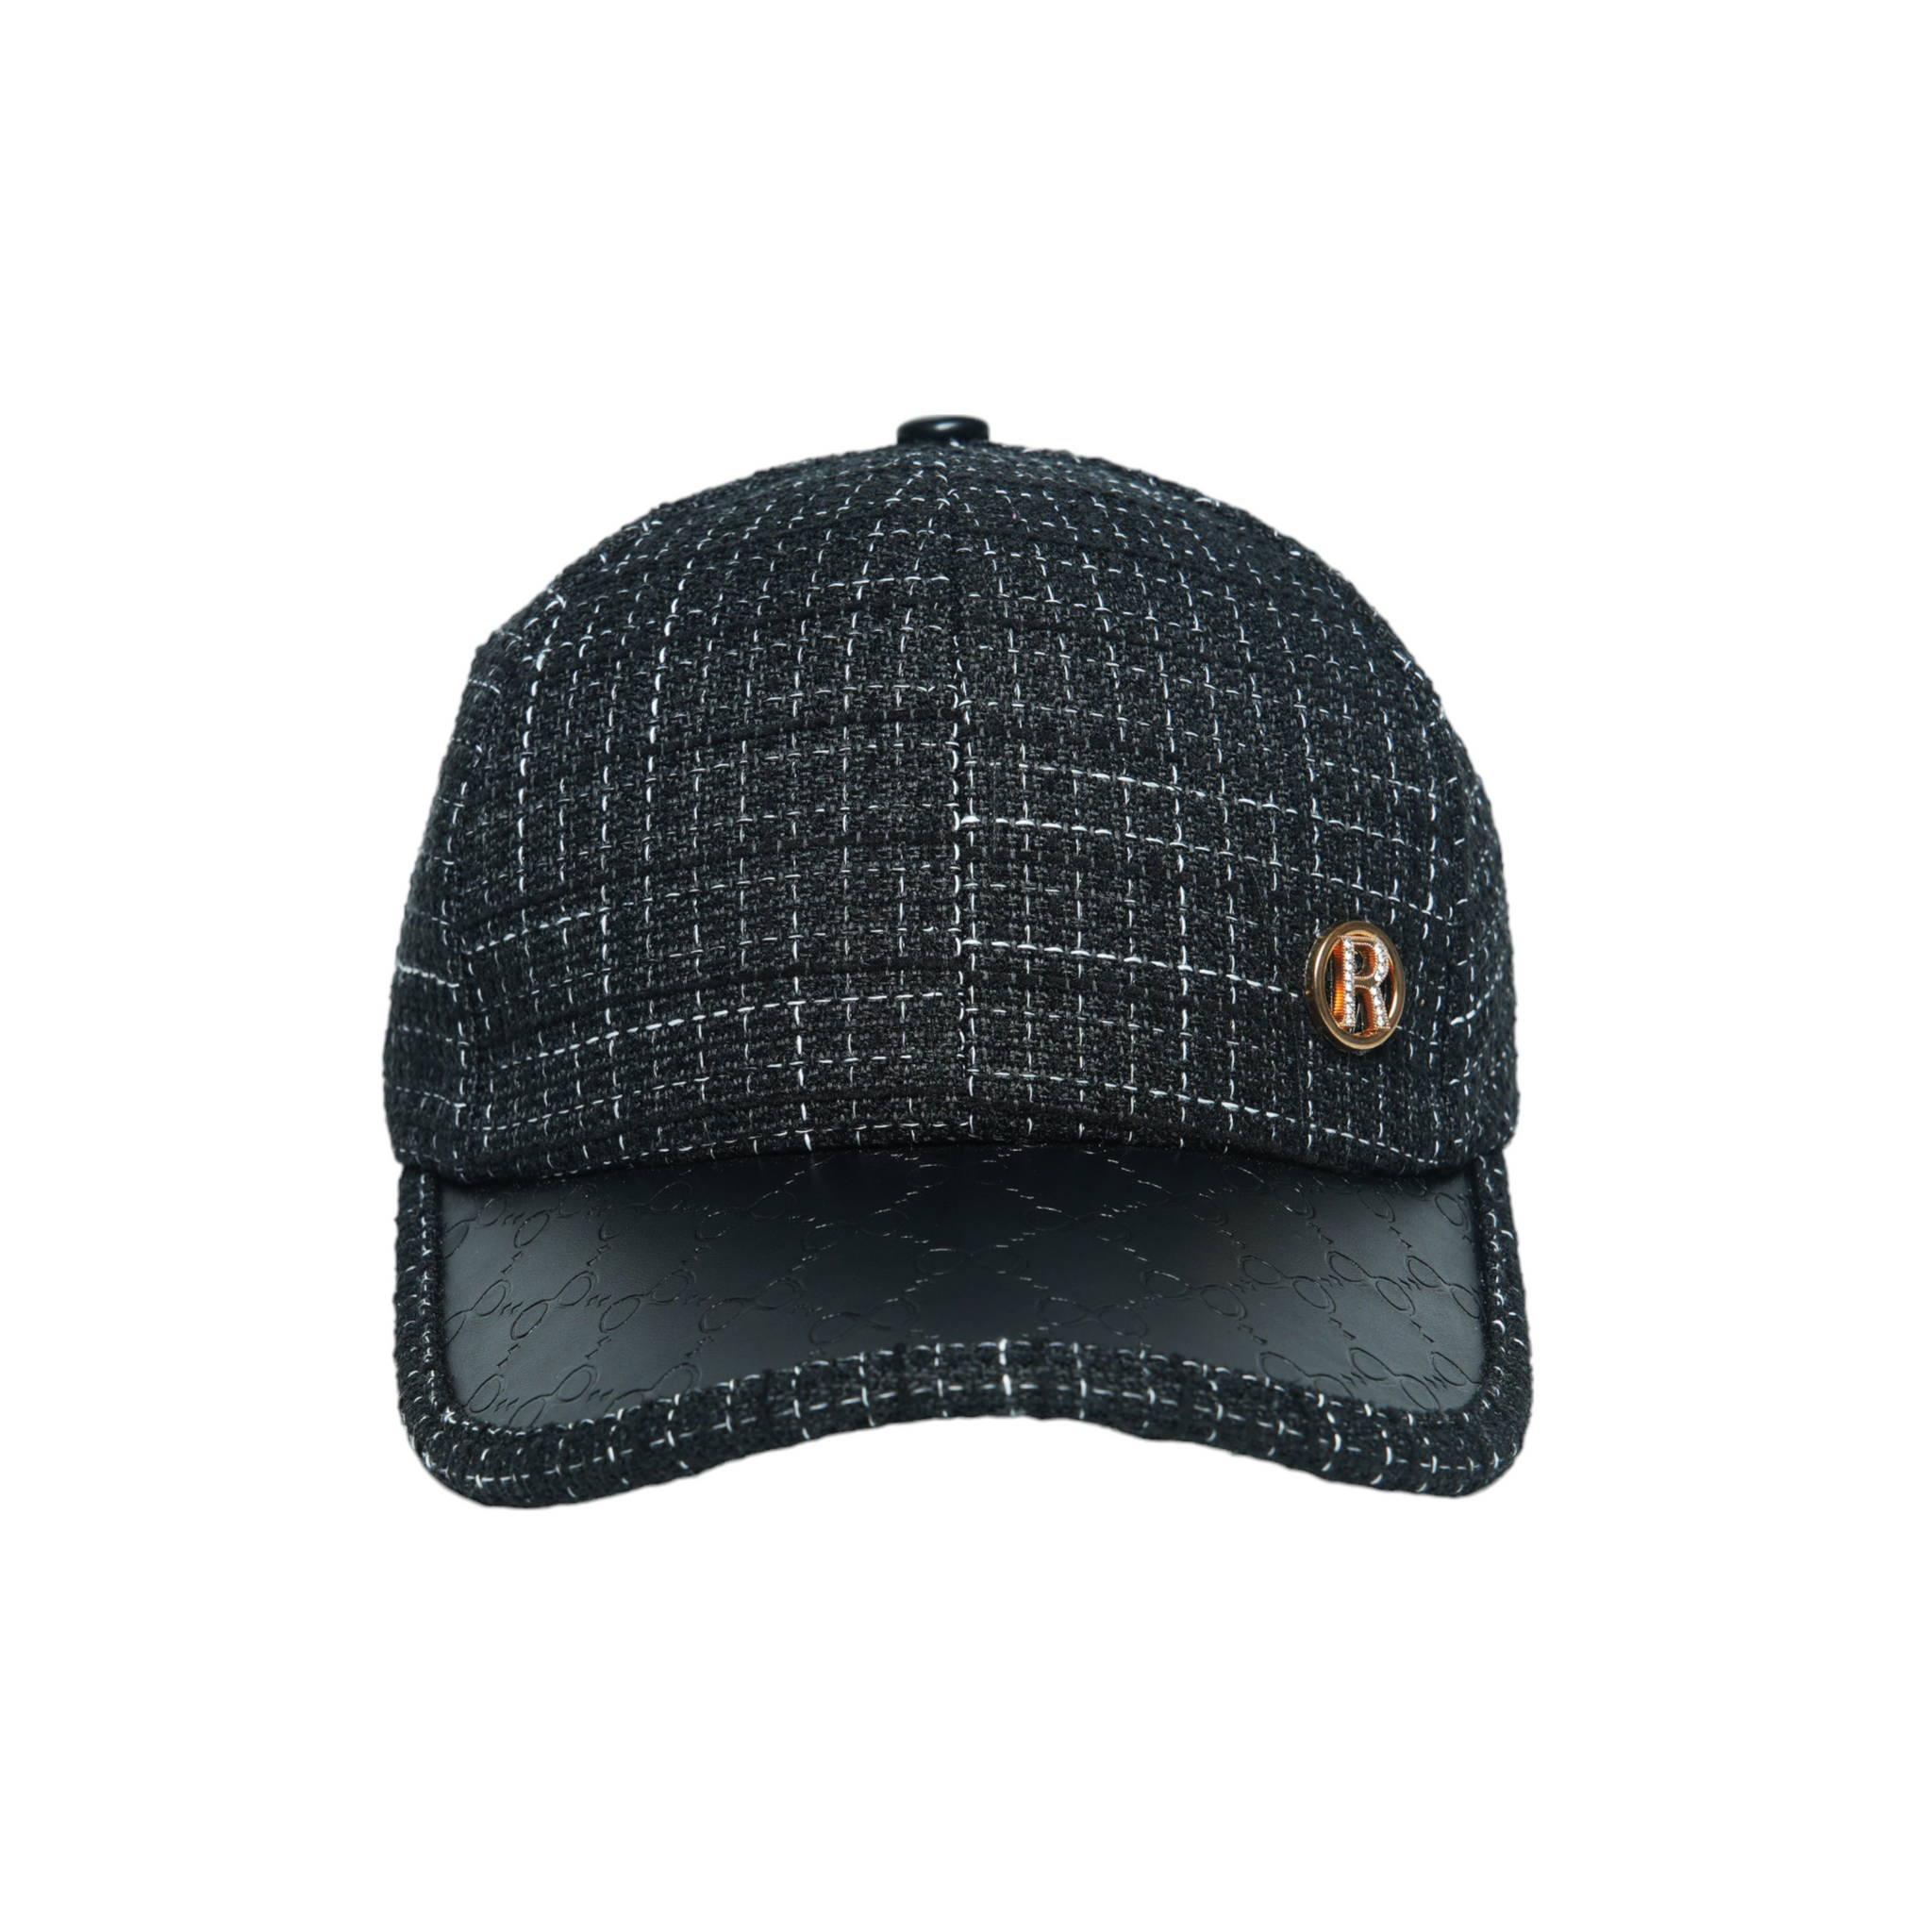 Chokore Retro Houndstooth Pattern Baseball Cap with Leather Details (Black)